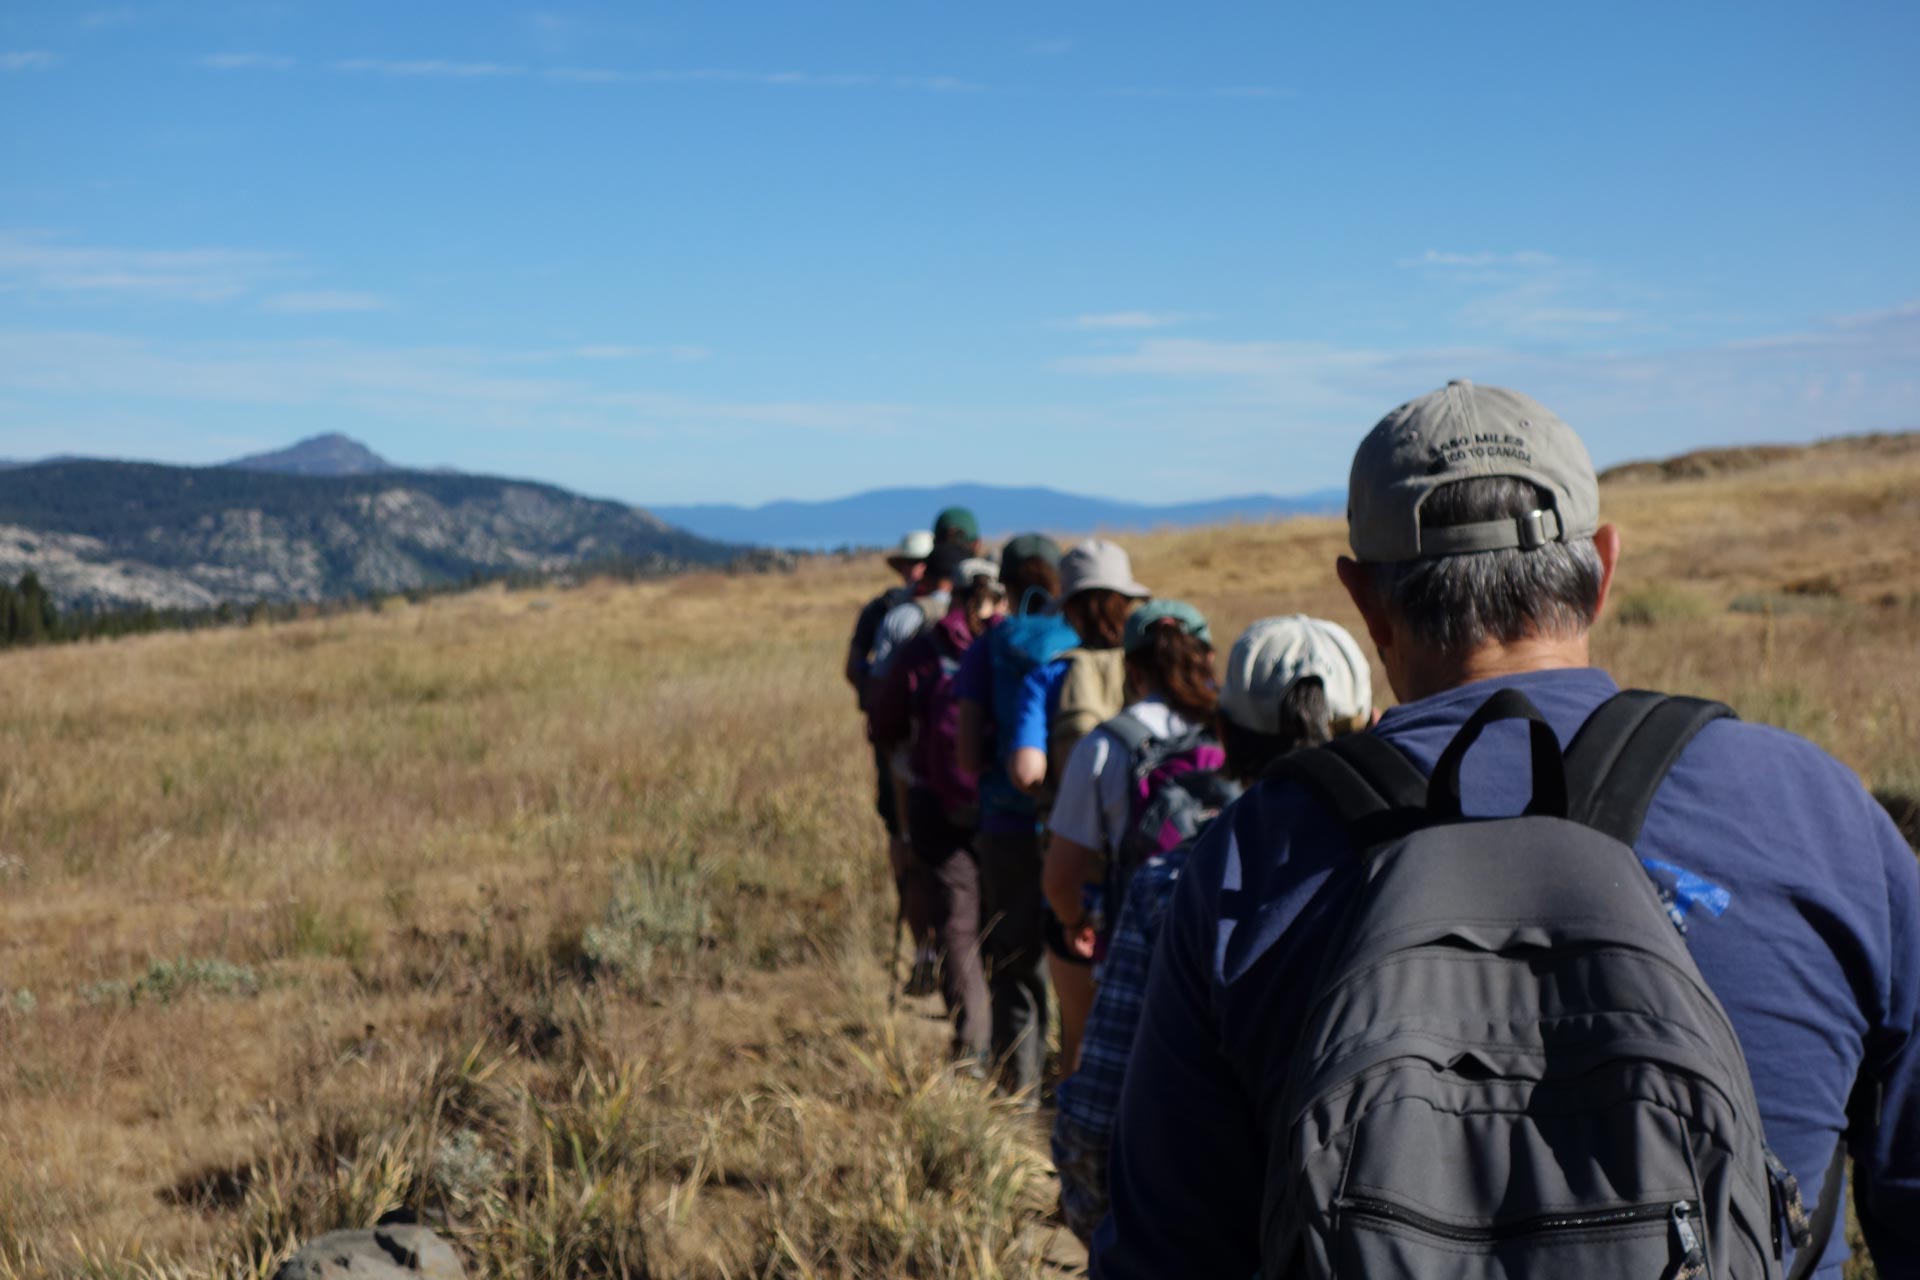 Joining a hiking club is a great way to get out and meet new people that share your passion.